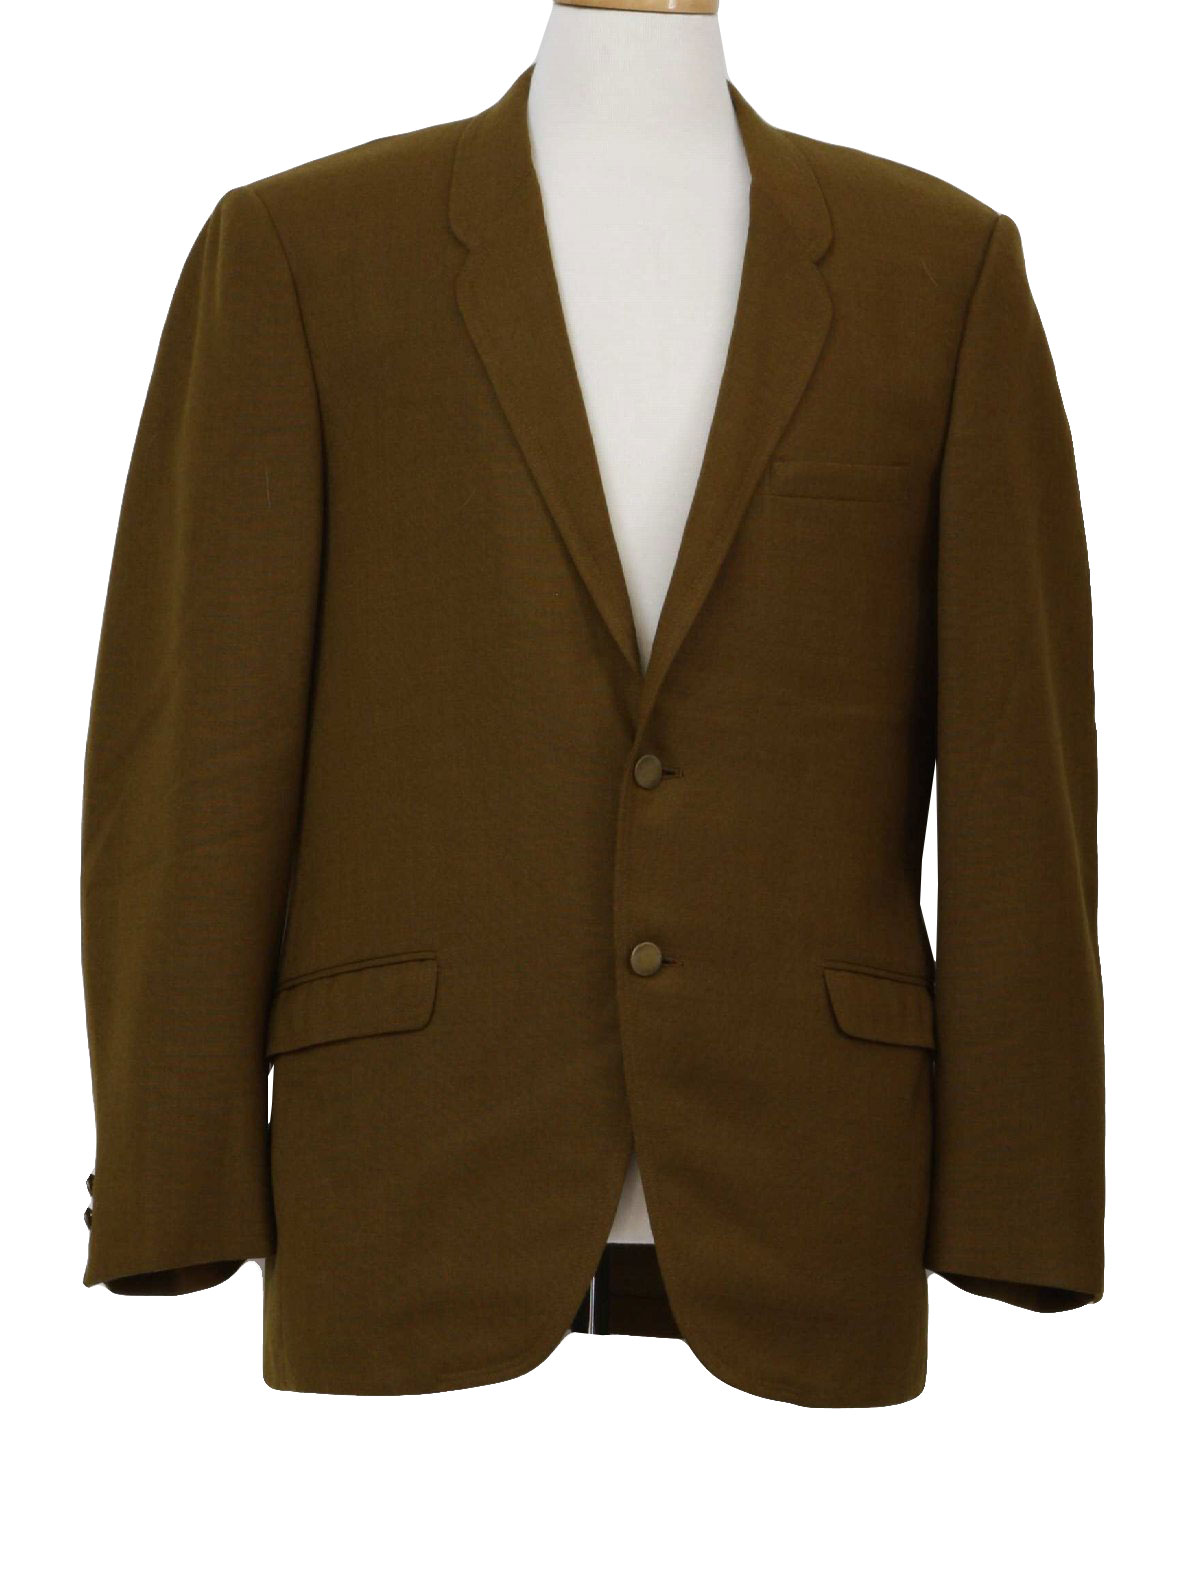 Rough Rider 60's Vintage Jacket: 60s -Rough Rider- Mens olive-tan woven